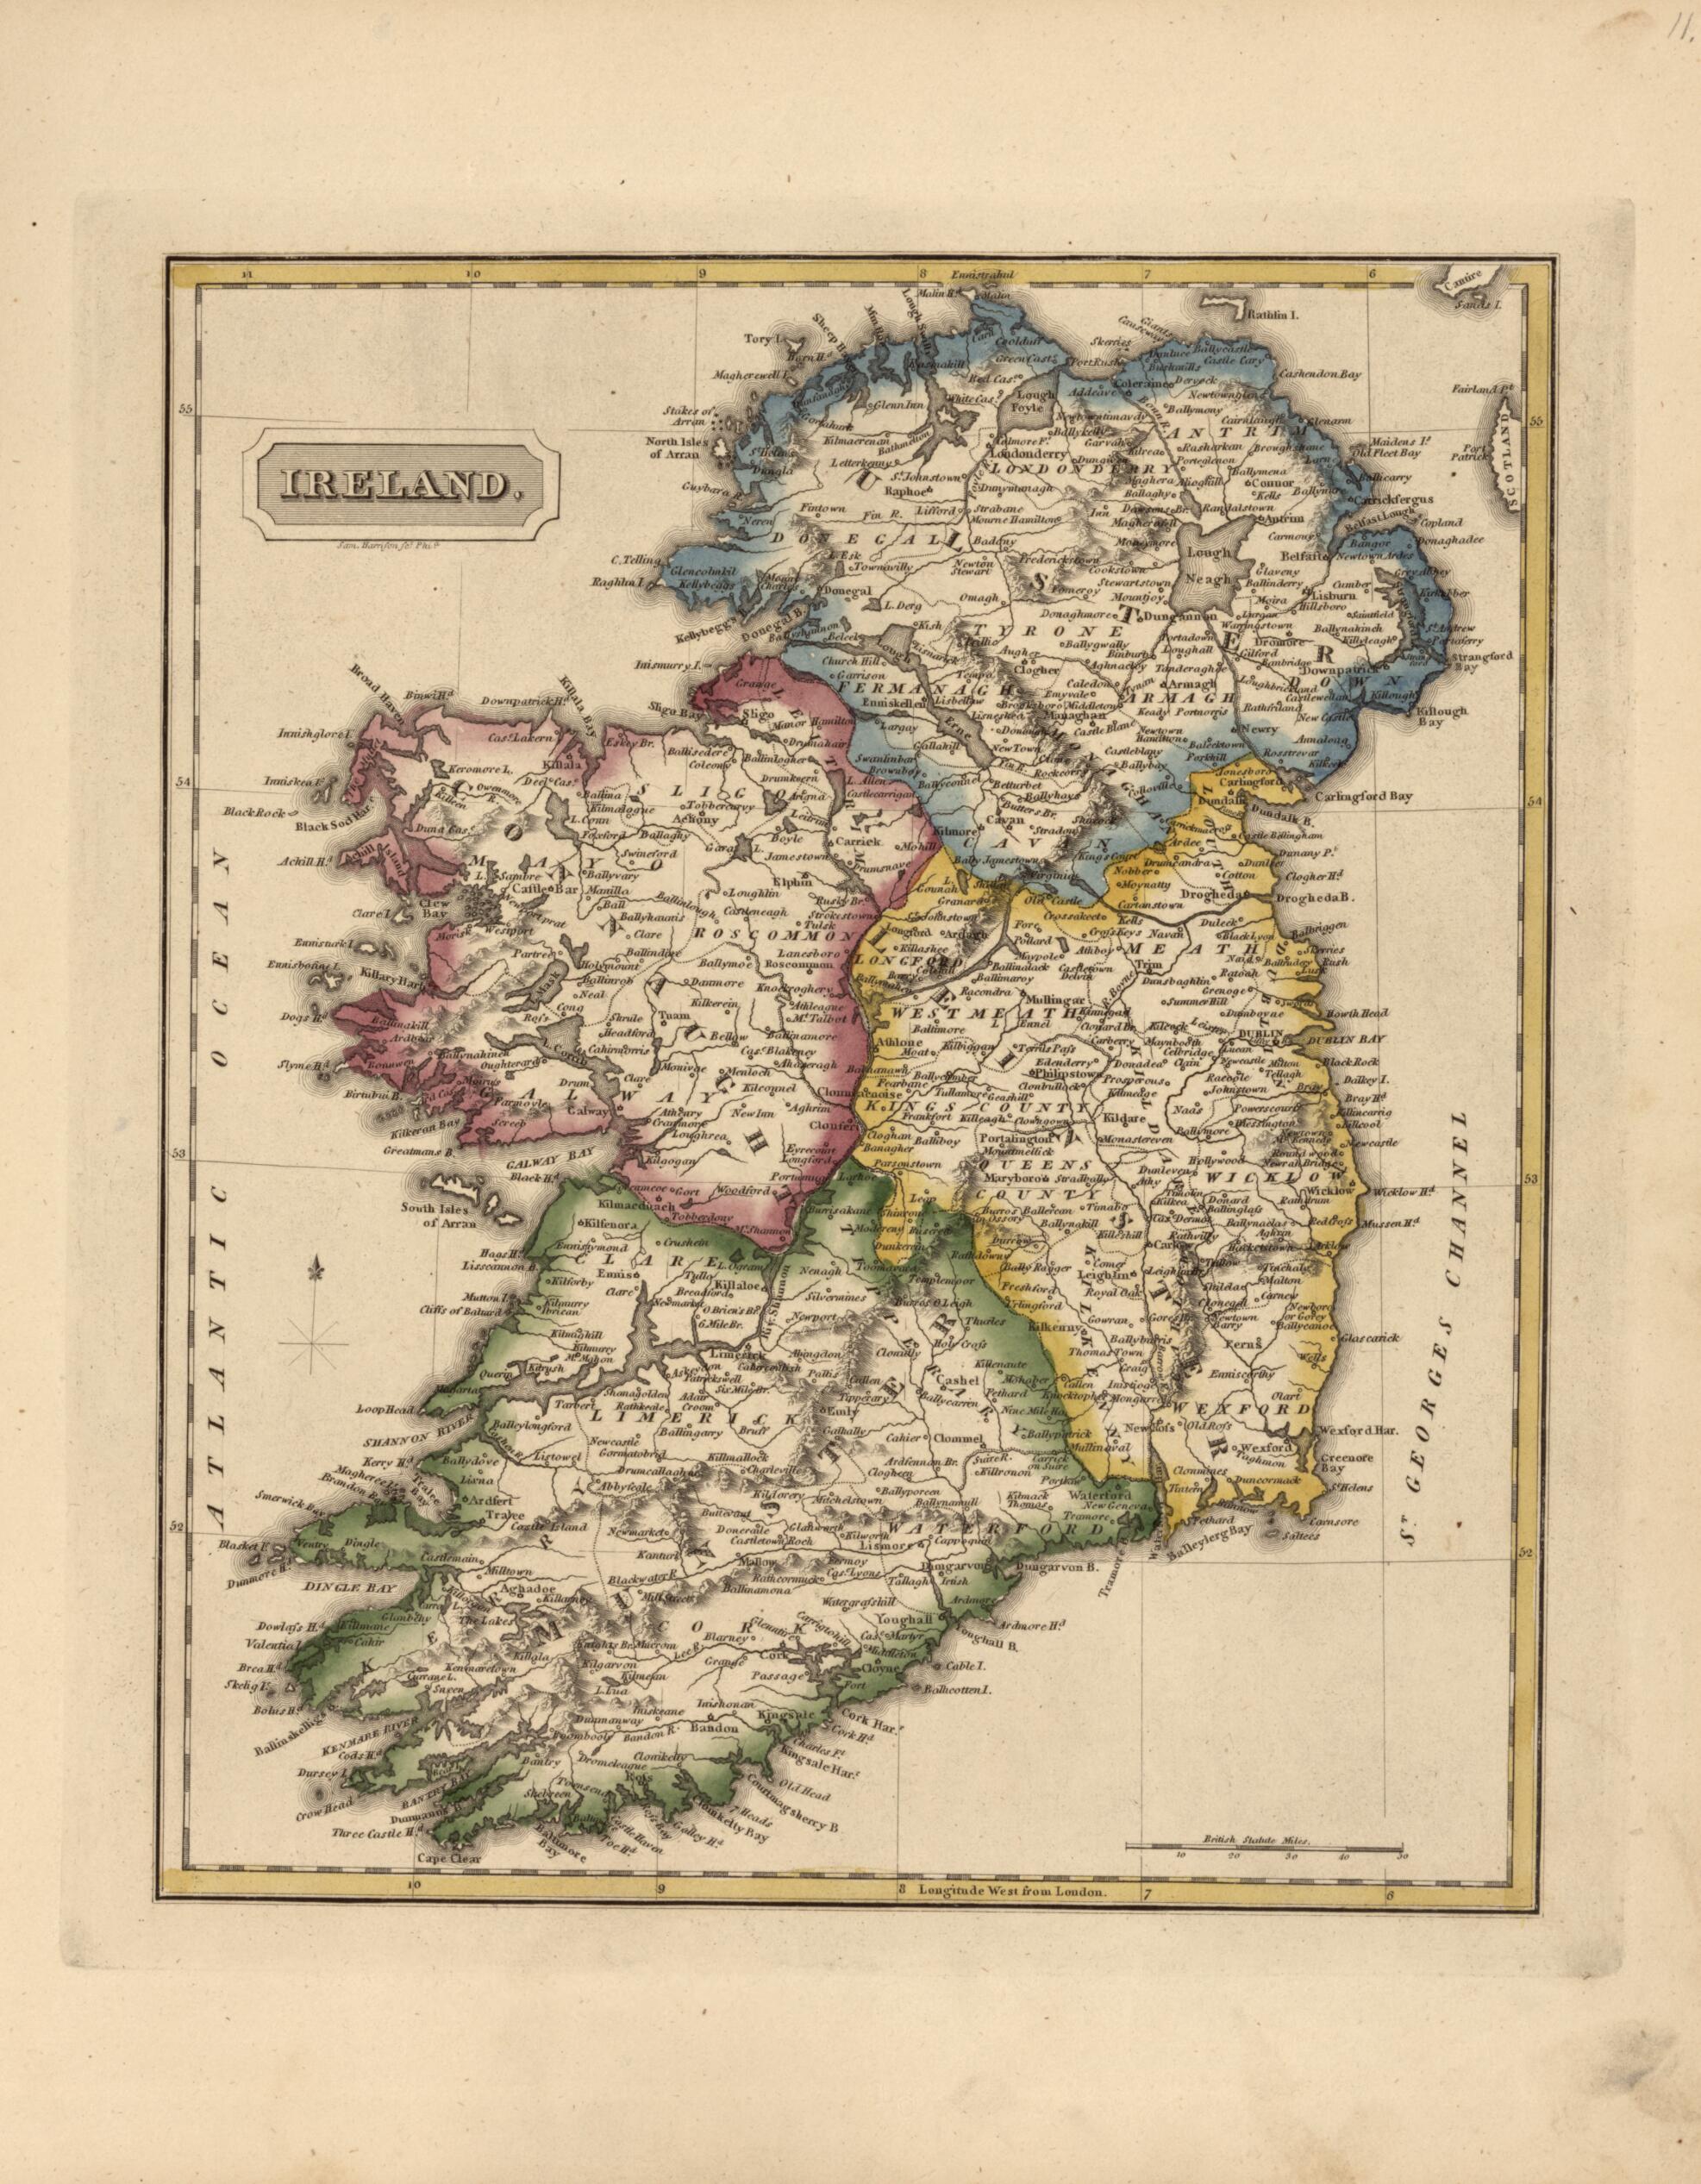 This old map of Ireland from a New and Elegant General Atlas, Containing Maps of Each of the United States. from 1817 was created by Henry Schenck Tanner in 1817